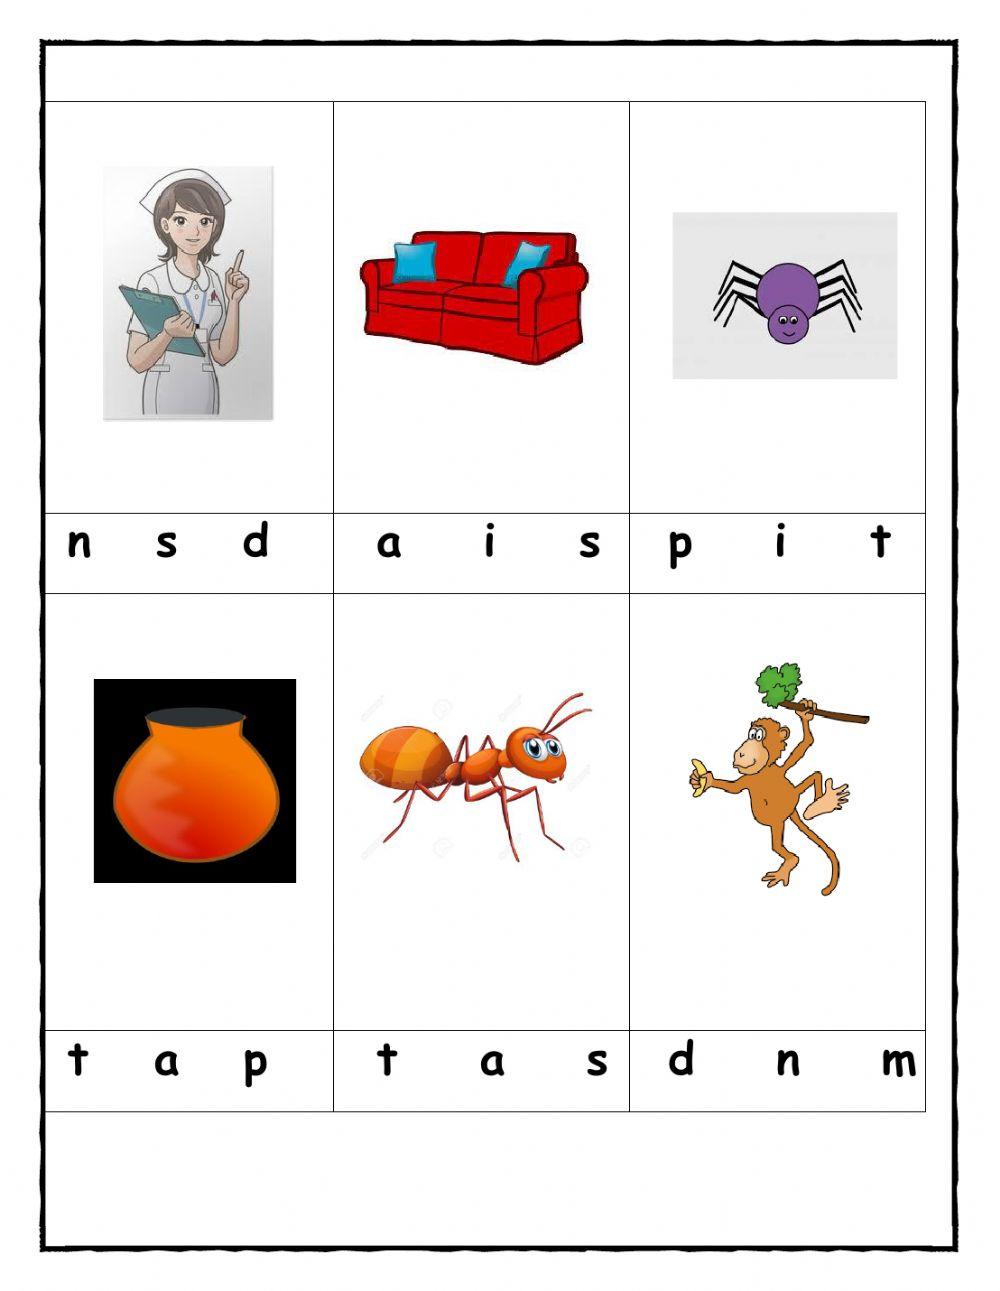 Revision - Recap of phonics - First sound